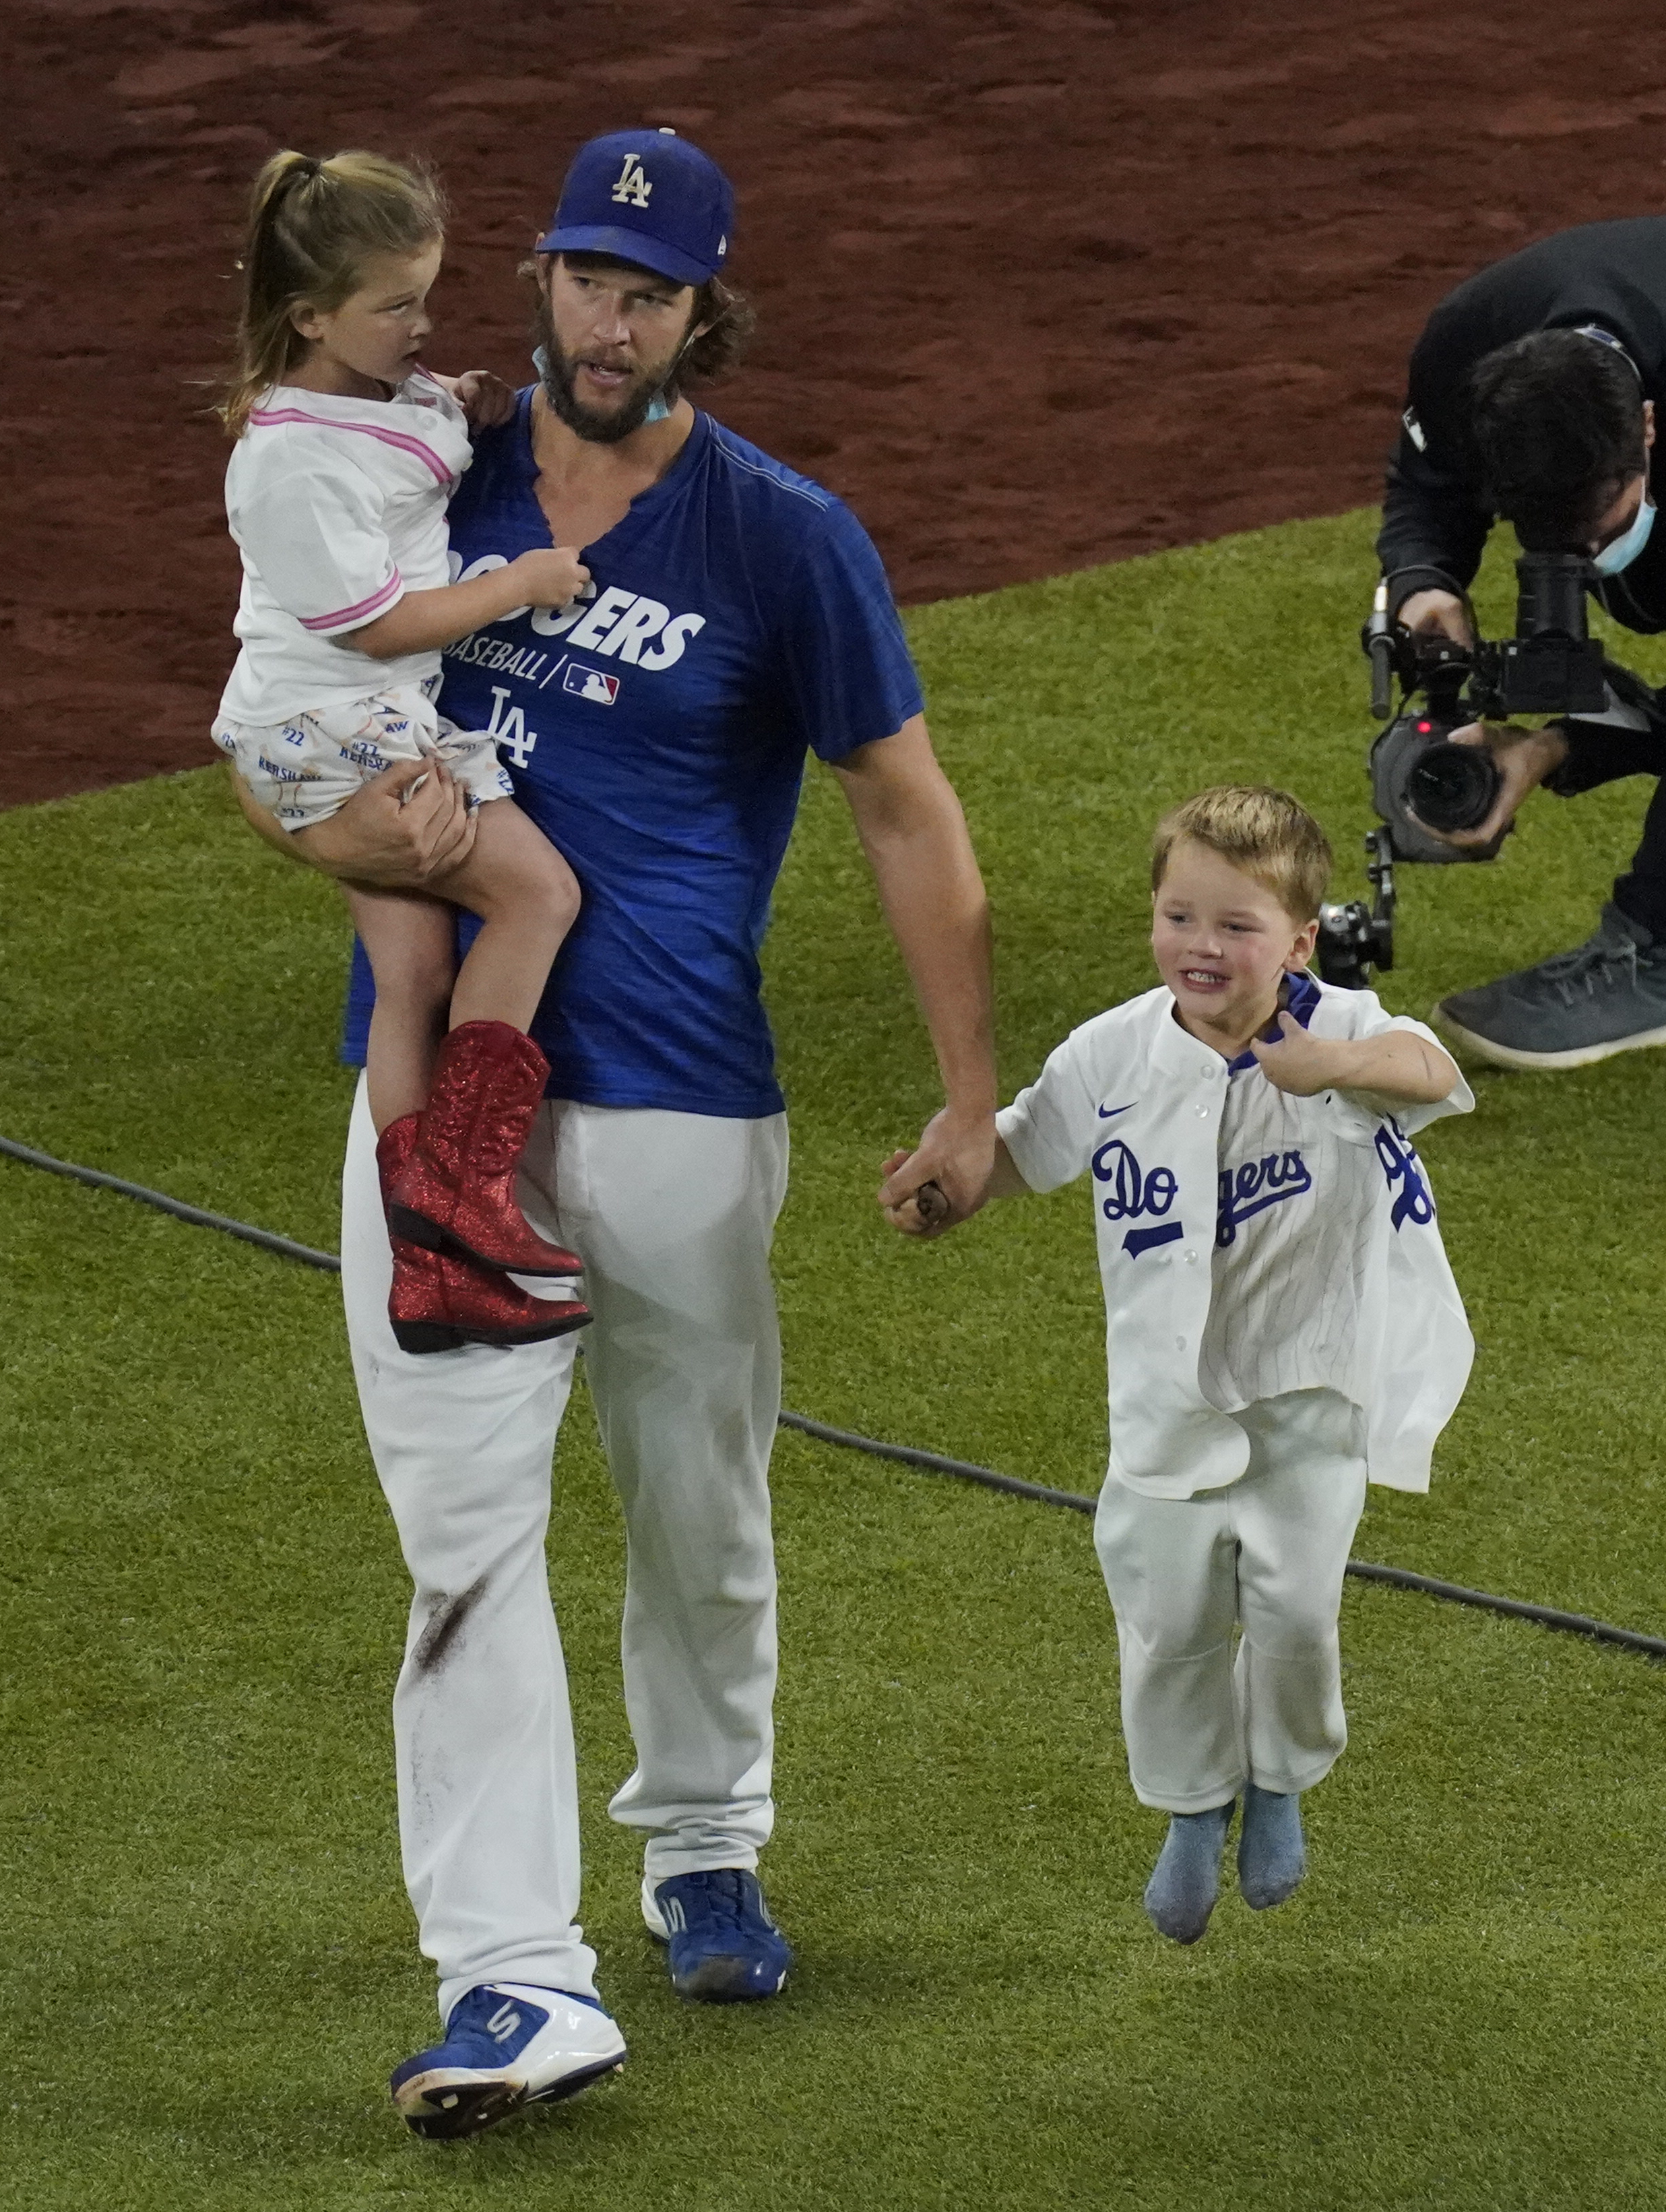 World Series: Clayton Kershaw pushes Dodgers closer to elusive